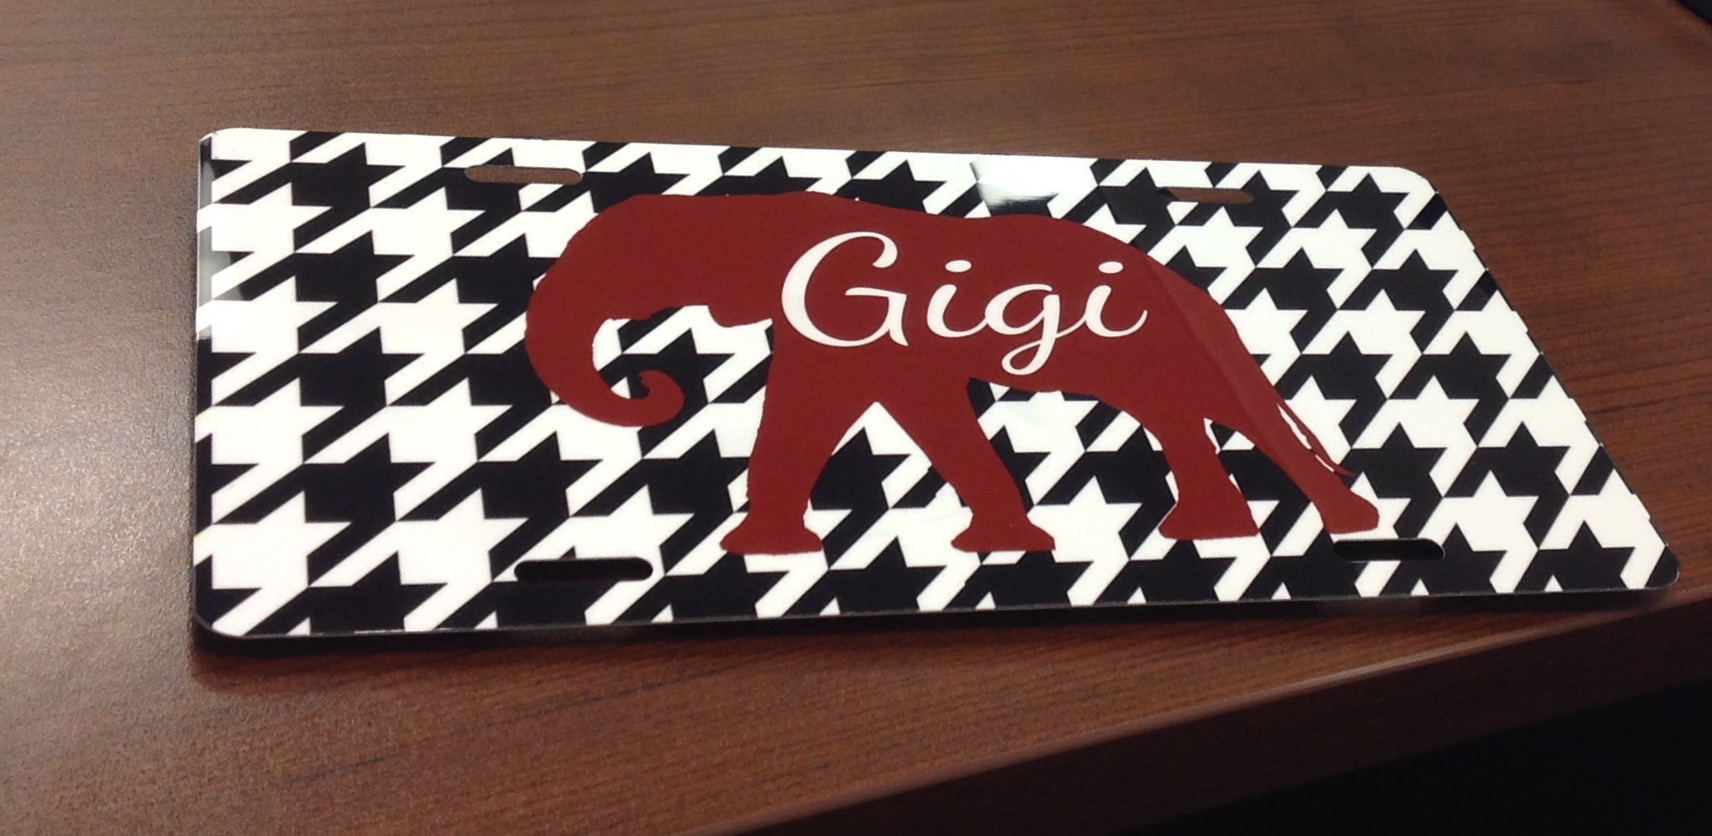 CollegeThemed License Plate made with sublimation printing